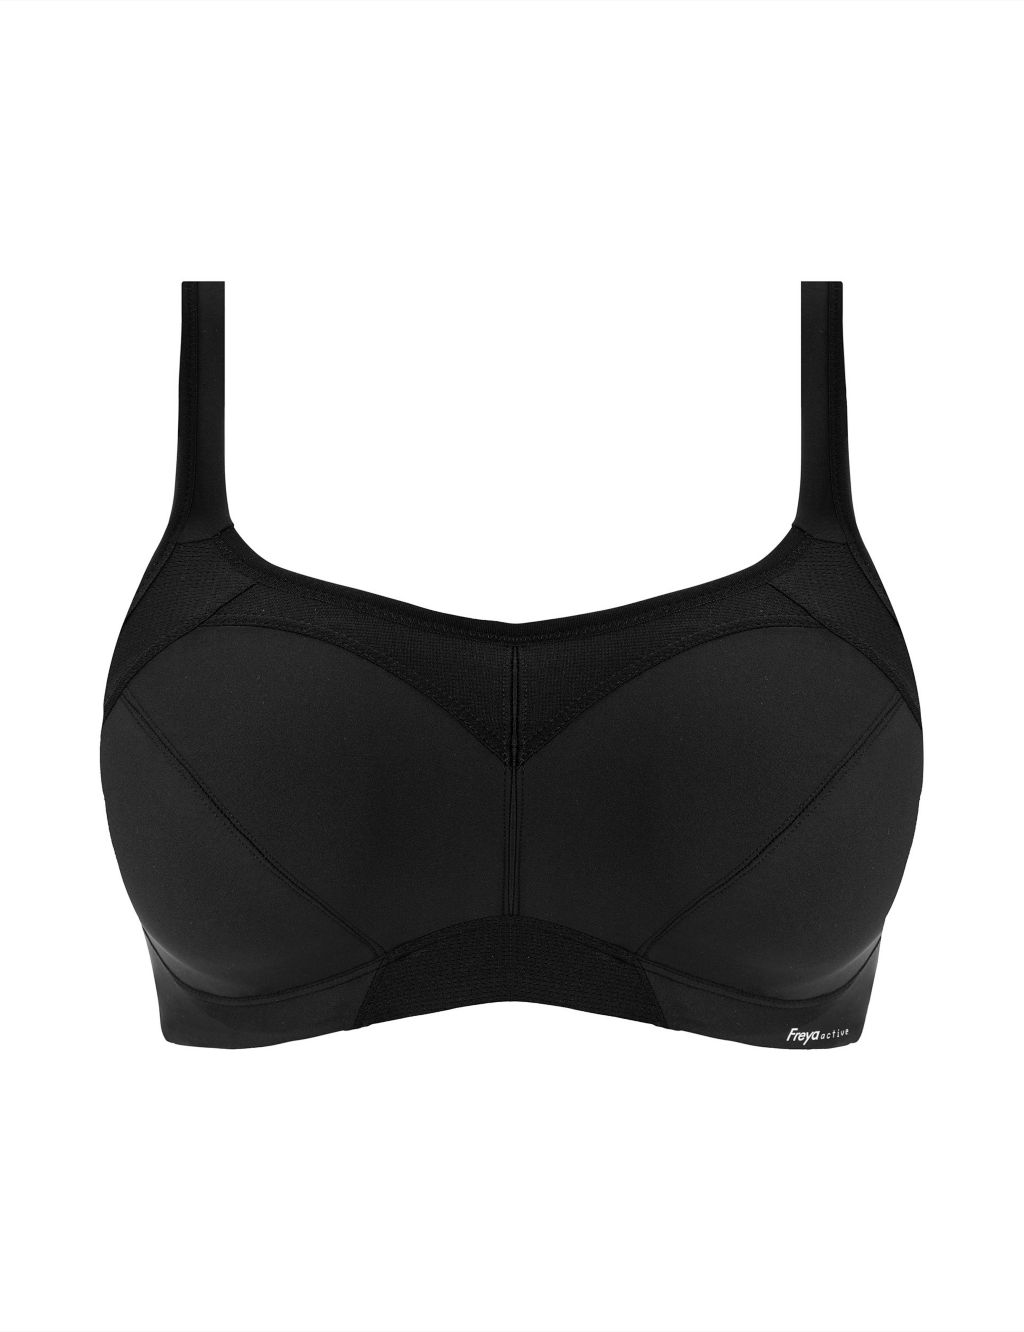 High-Octane Ultimate Support Wired Sports Bra image 2